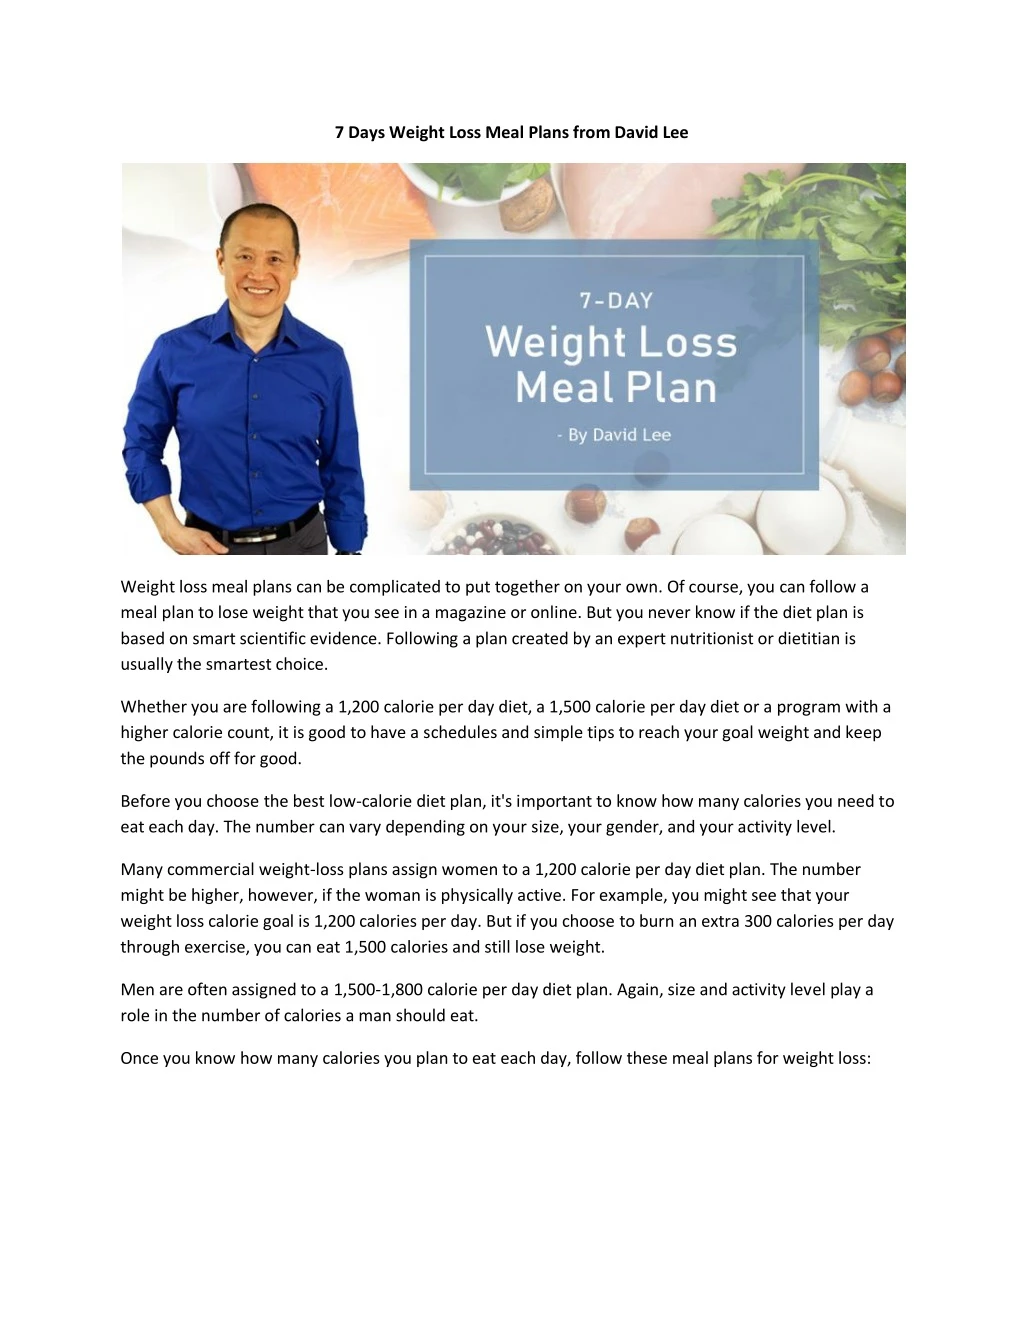 7 days weight loss meal plans from david lee